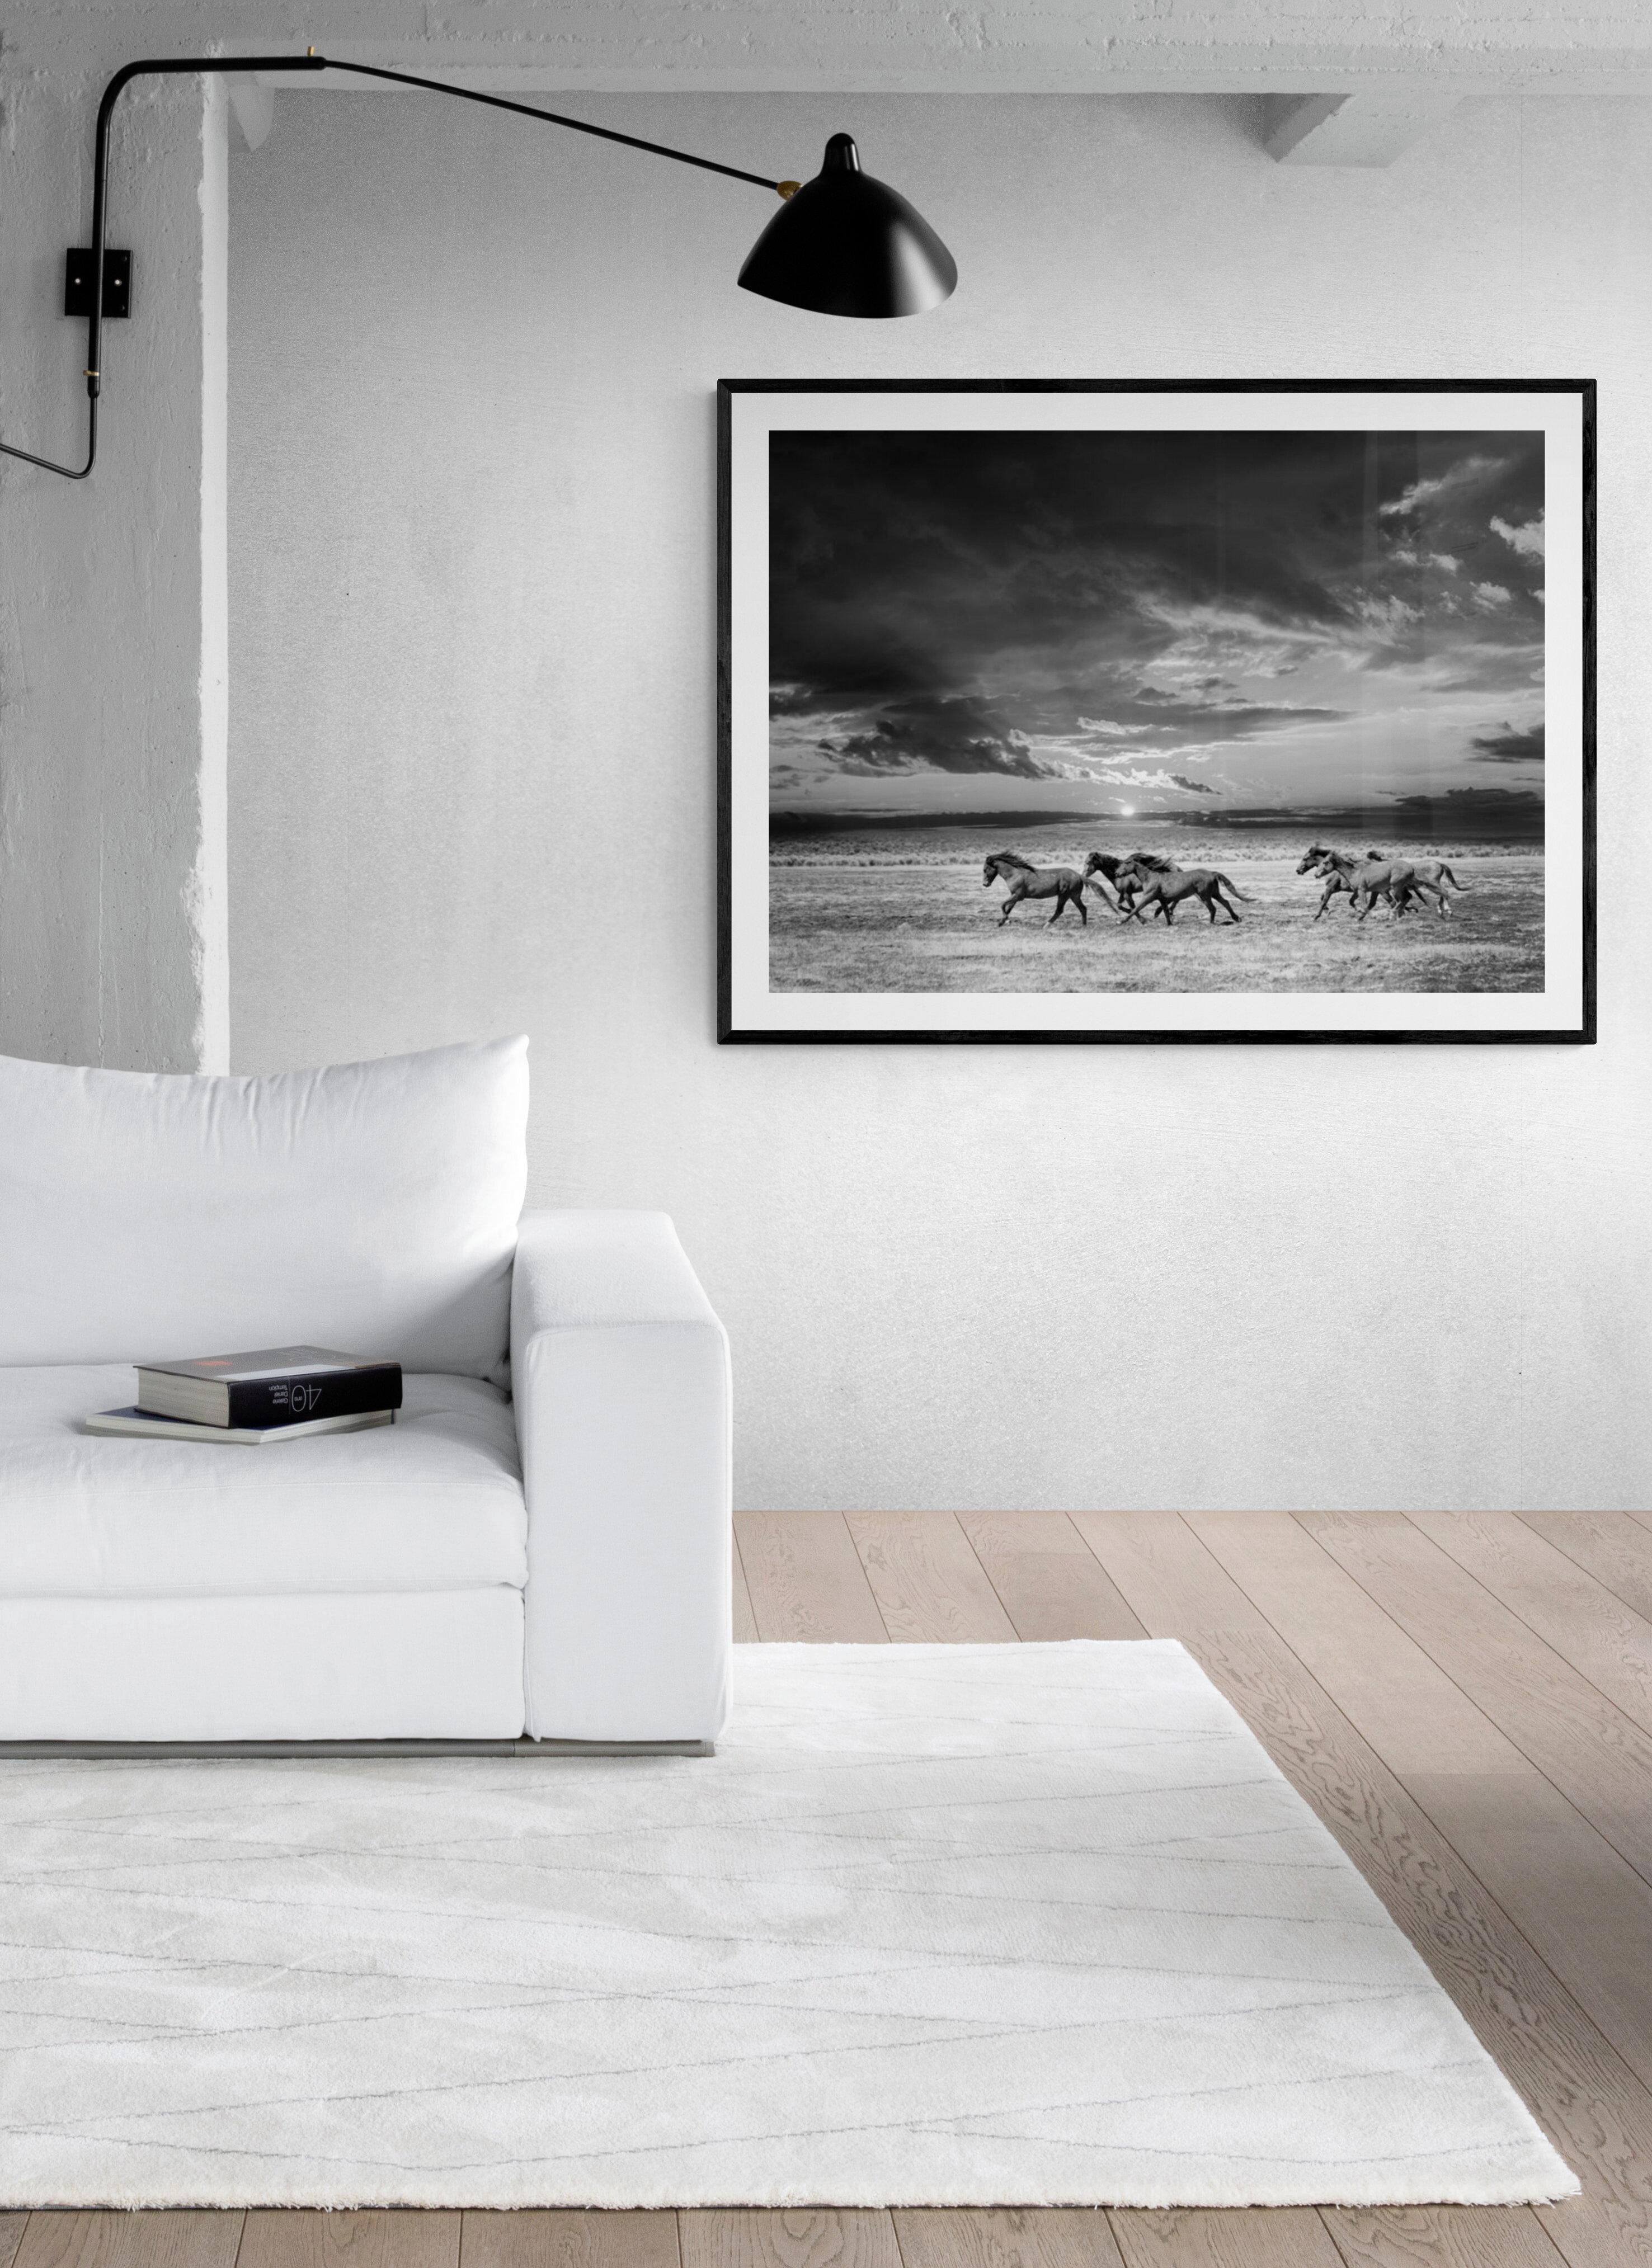 36x48 Photography of Wild Horses - Mustangs Photograph Print Sunset Landscape 2